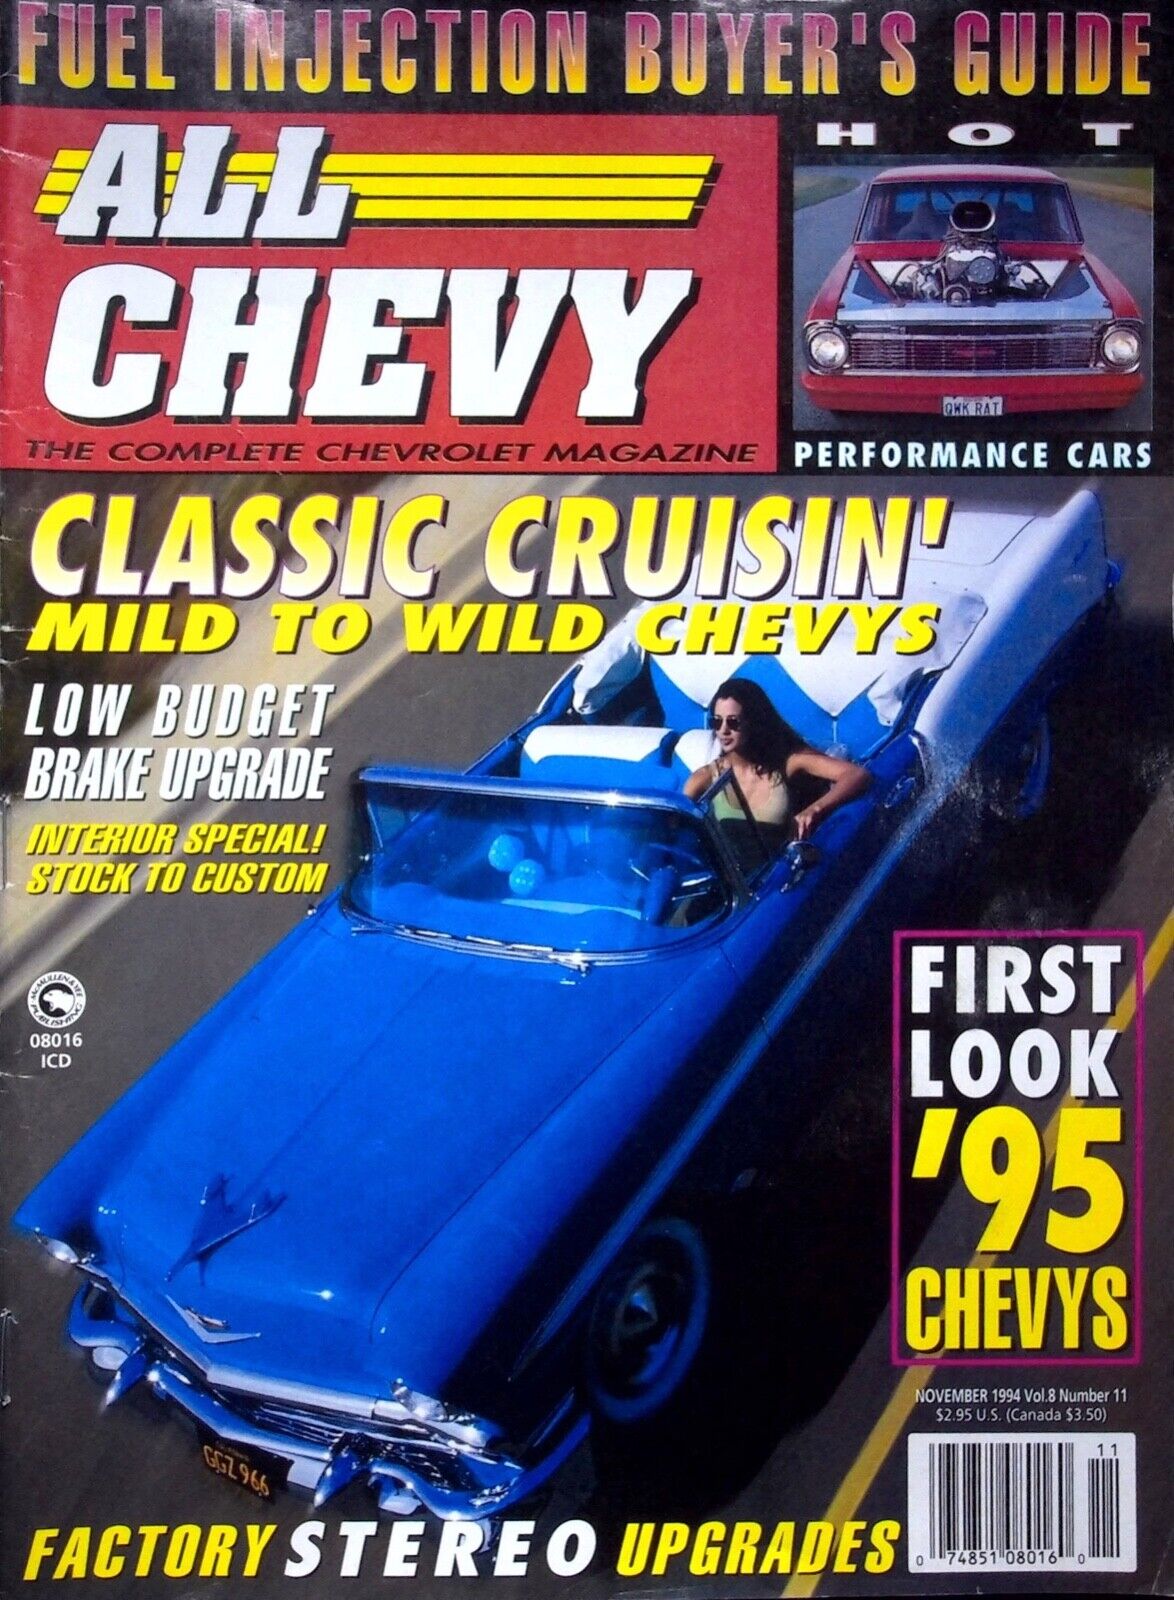 FIRST LOOK '95 CHEVYS - ALL CHEVY MAGAZINE, NOVEMBER 1994 VOL.8 NUMBER 11